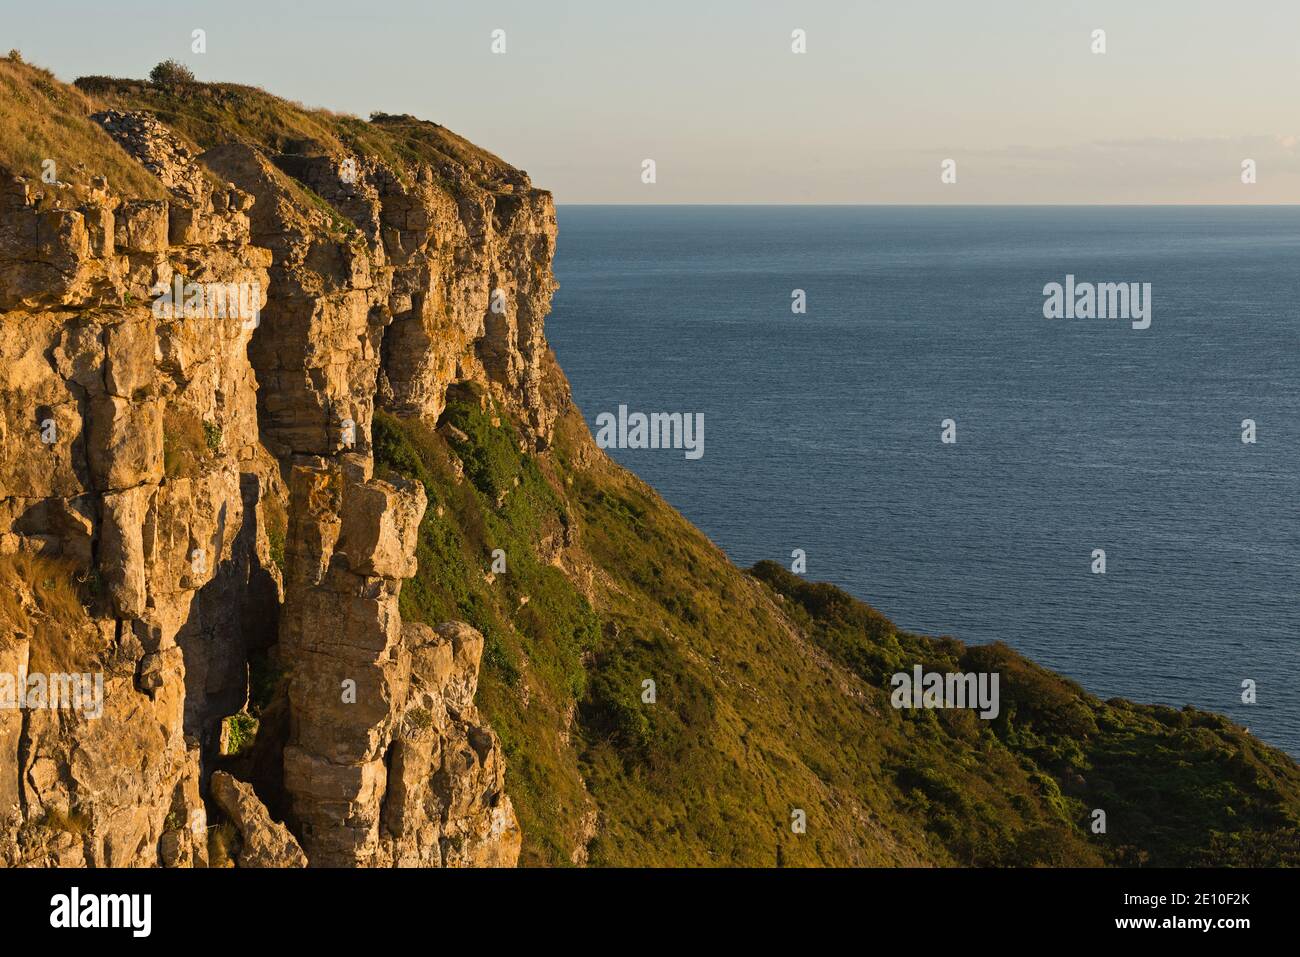 View along the cliffs from Emmetts Hill looking toward St Albans Head on the Dorset Coast. Part of the Jurassic Coast and South West Coast Path Stock Photo